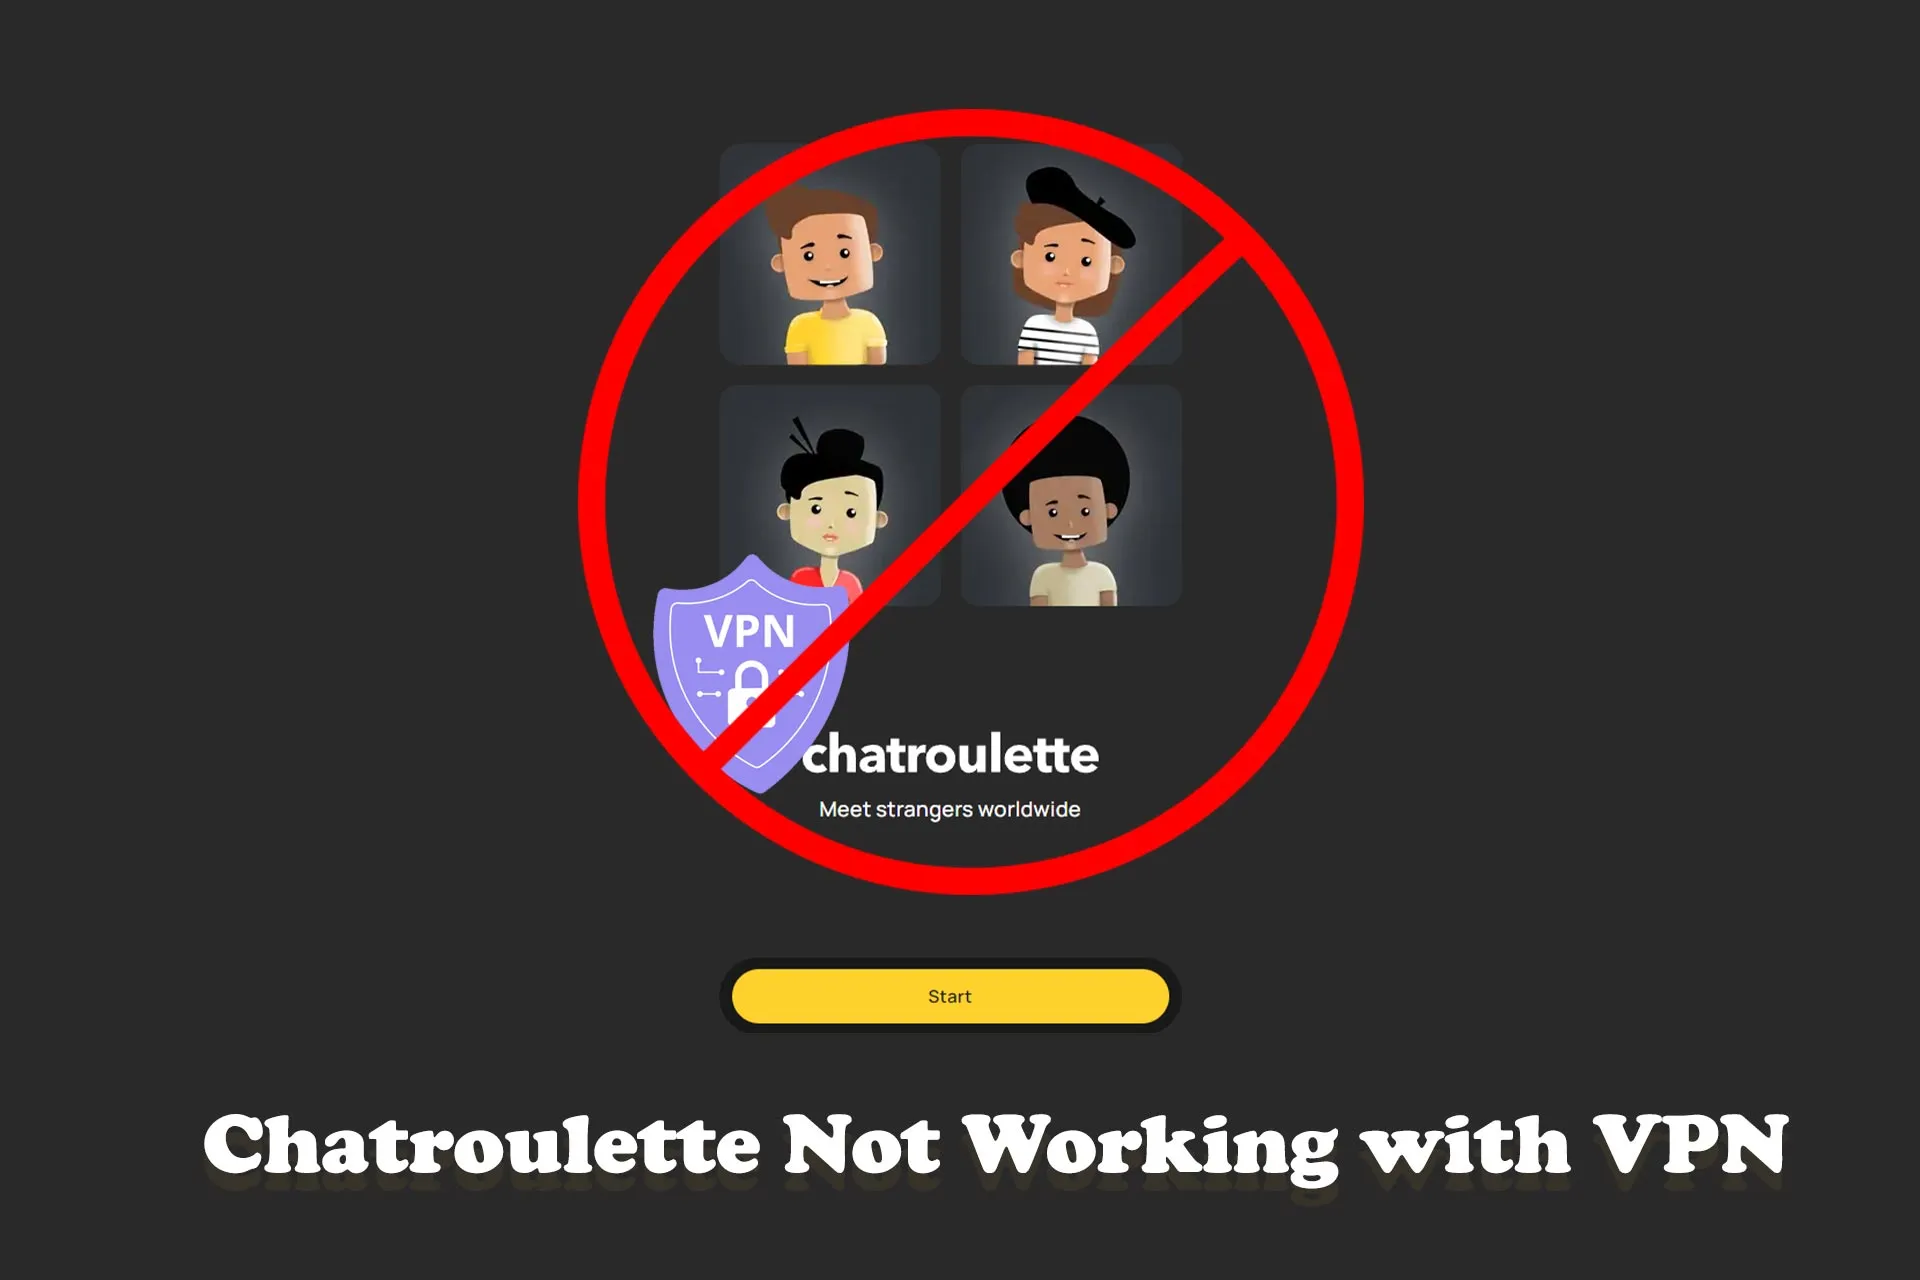 Chatroulette Not Working with VPN? Here‘s How to Fix it!